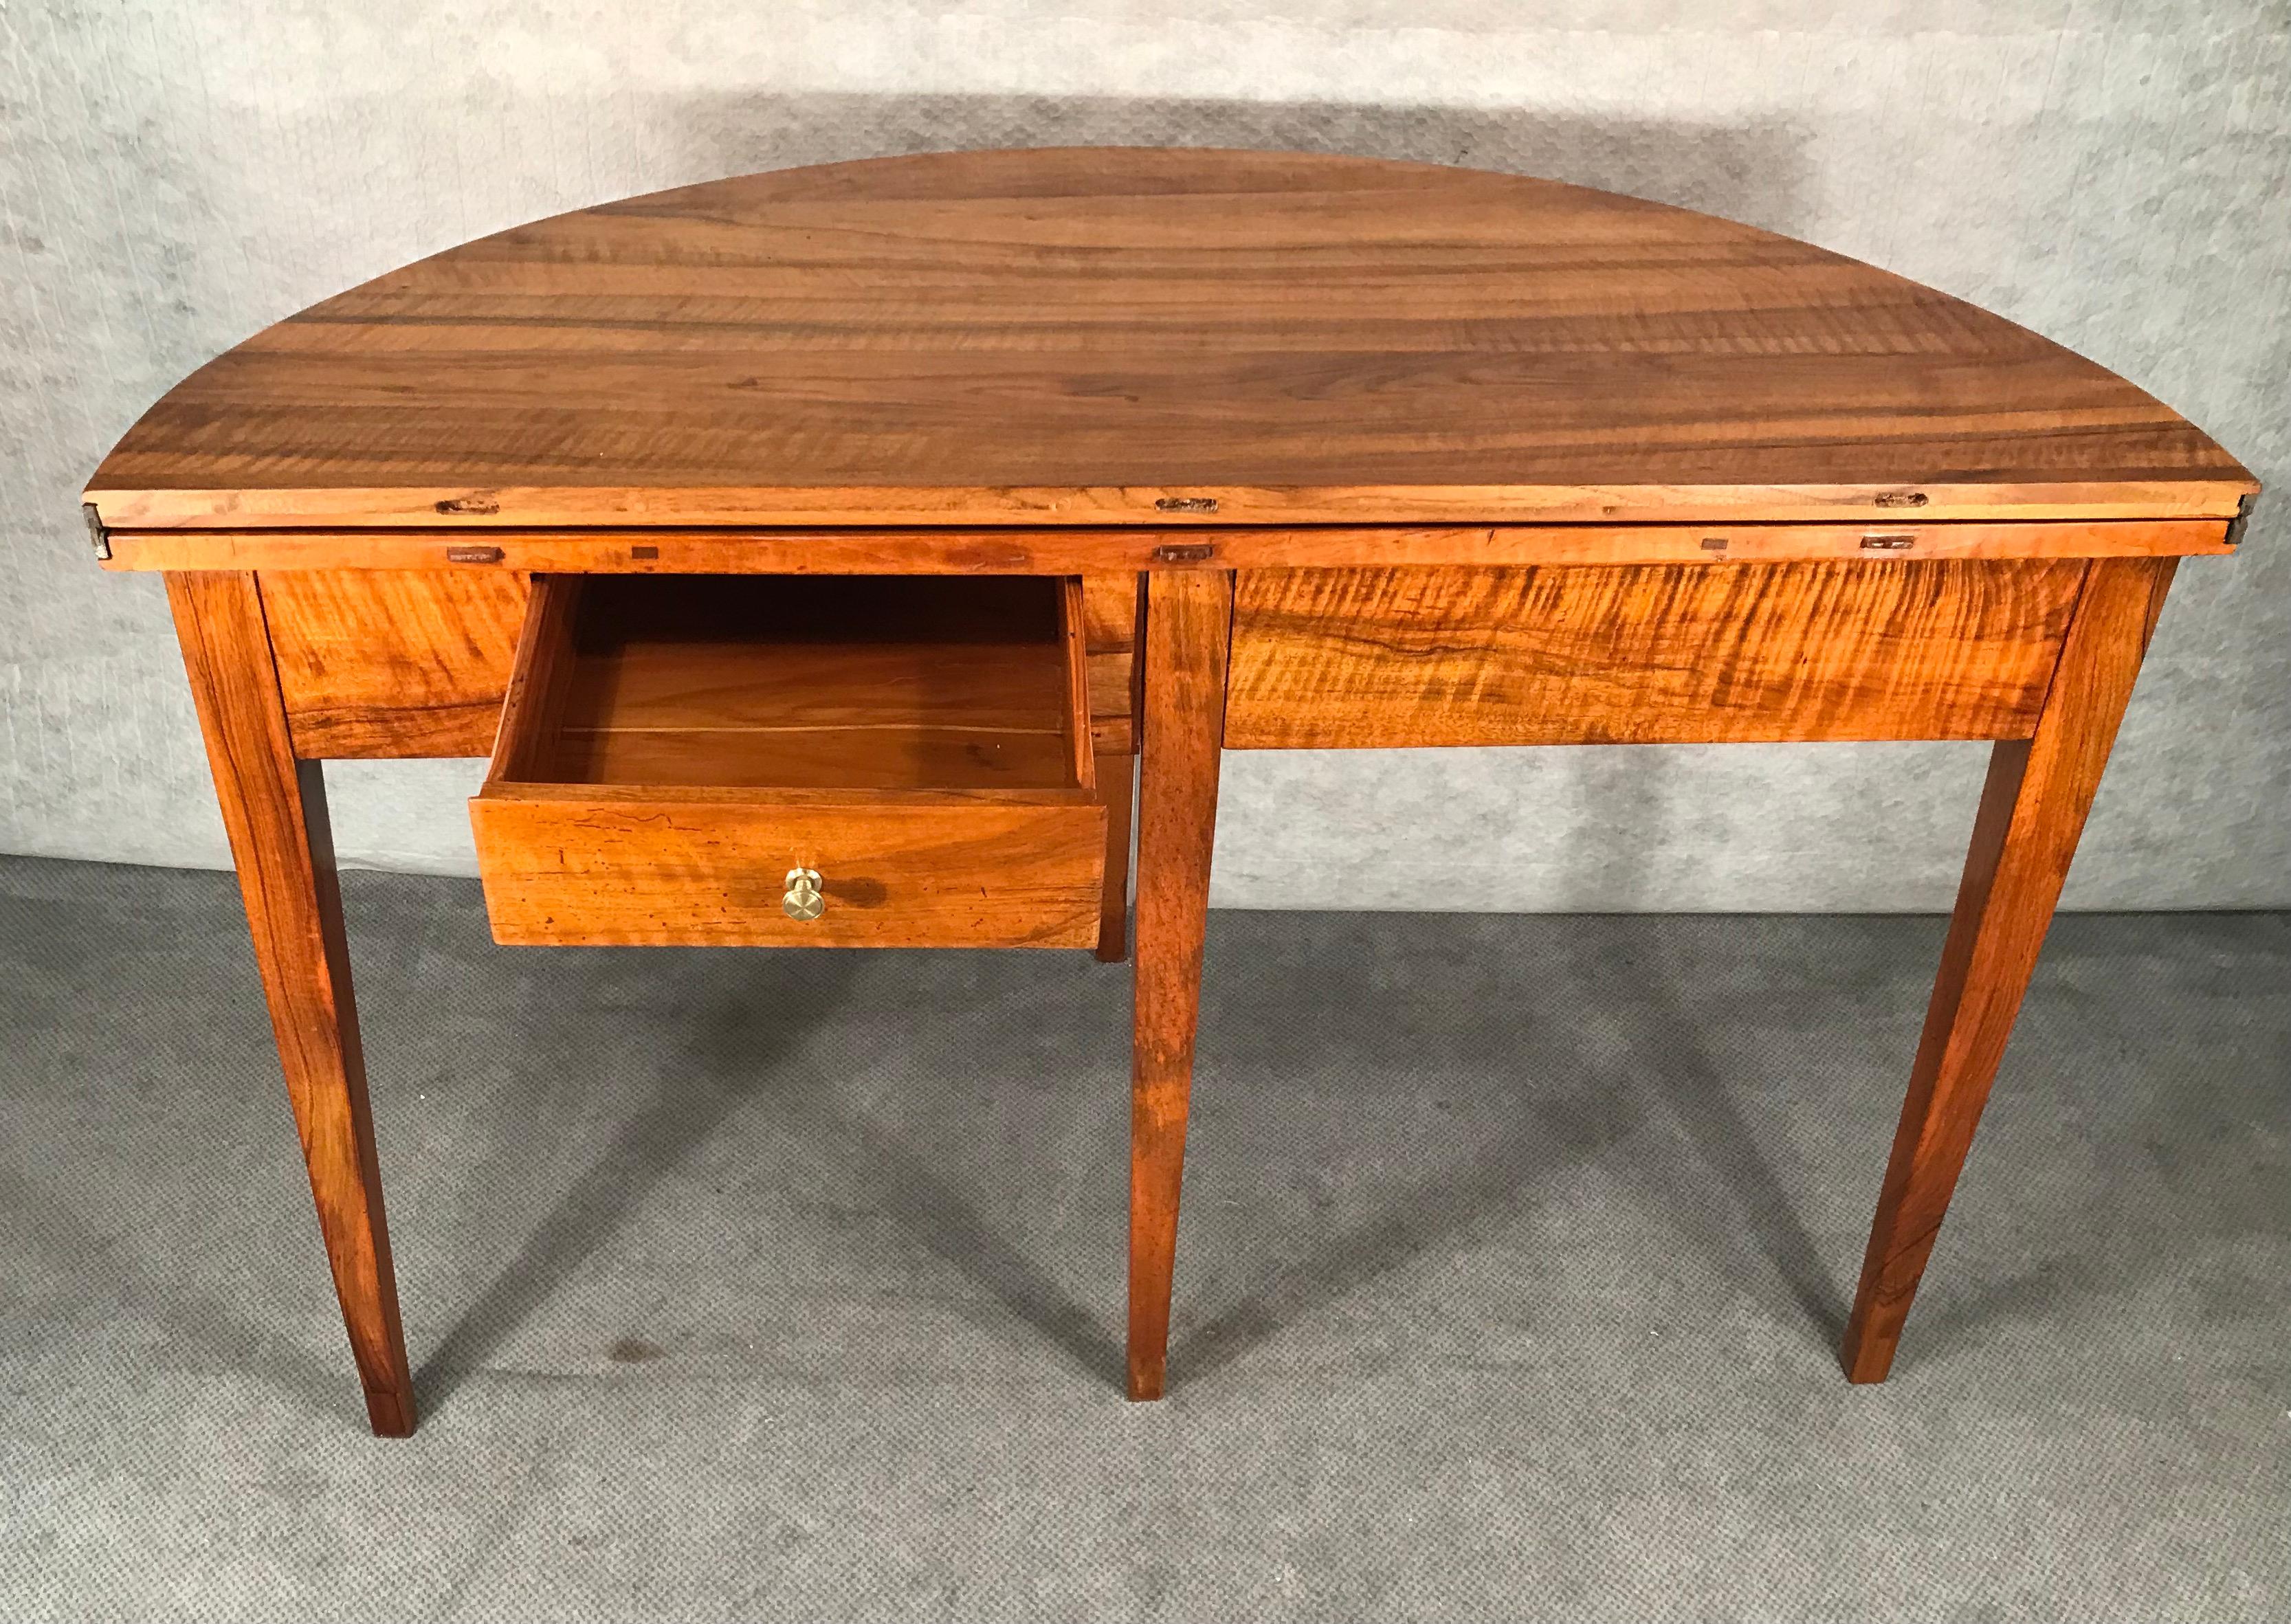 This elegant Demi-lune walnut table was made during the Biedermeier period in Southern Germany. It dates back to 1820. The table has a beautiful walnut veneer on top, apron and legs. There are two drawers in the apron. Your could easily use this